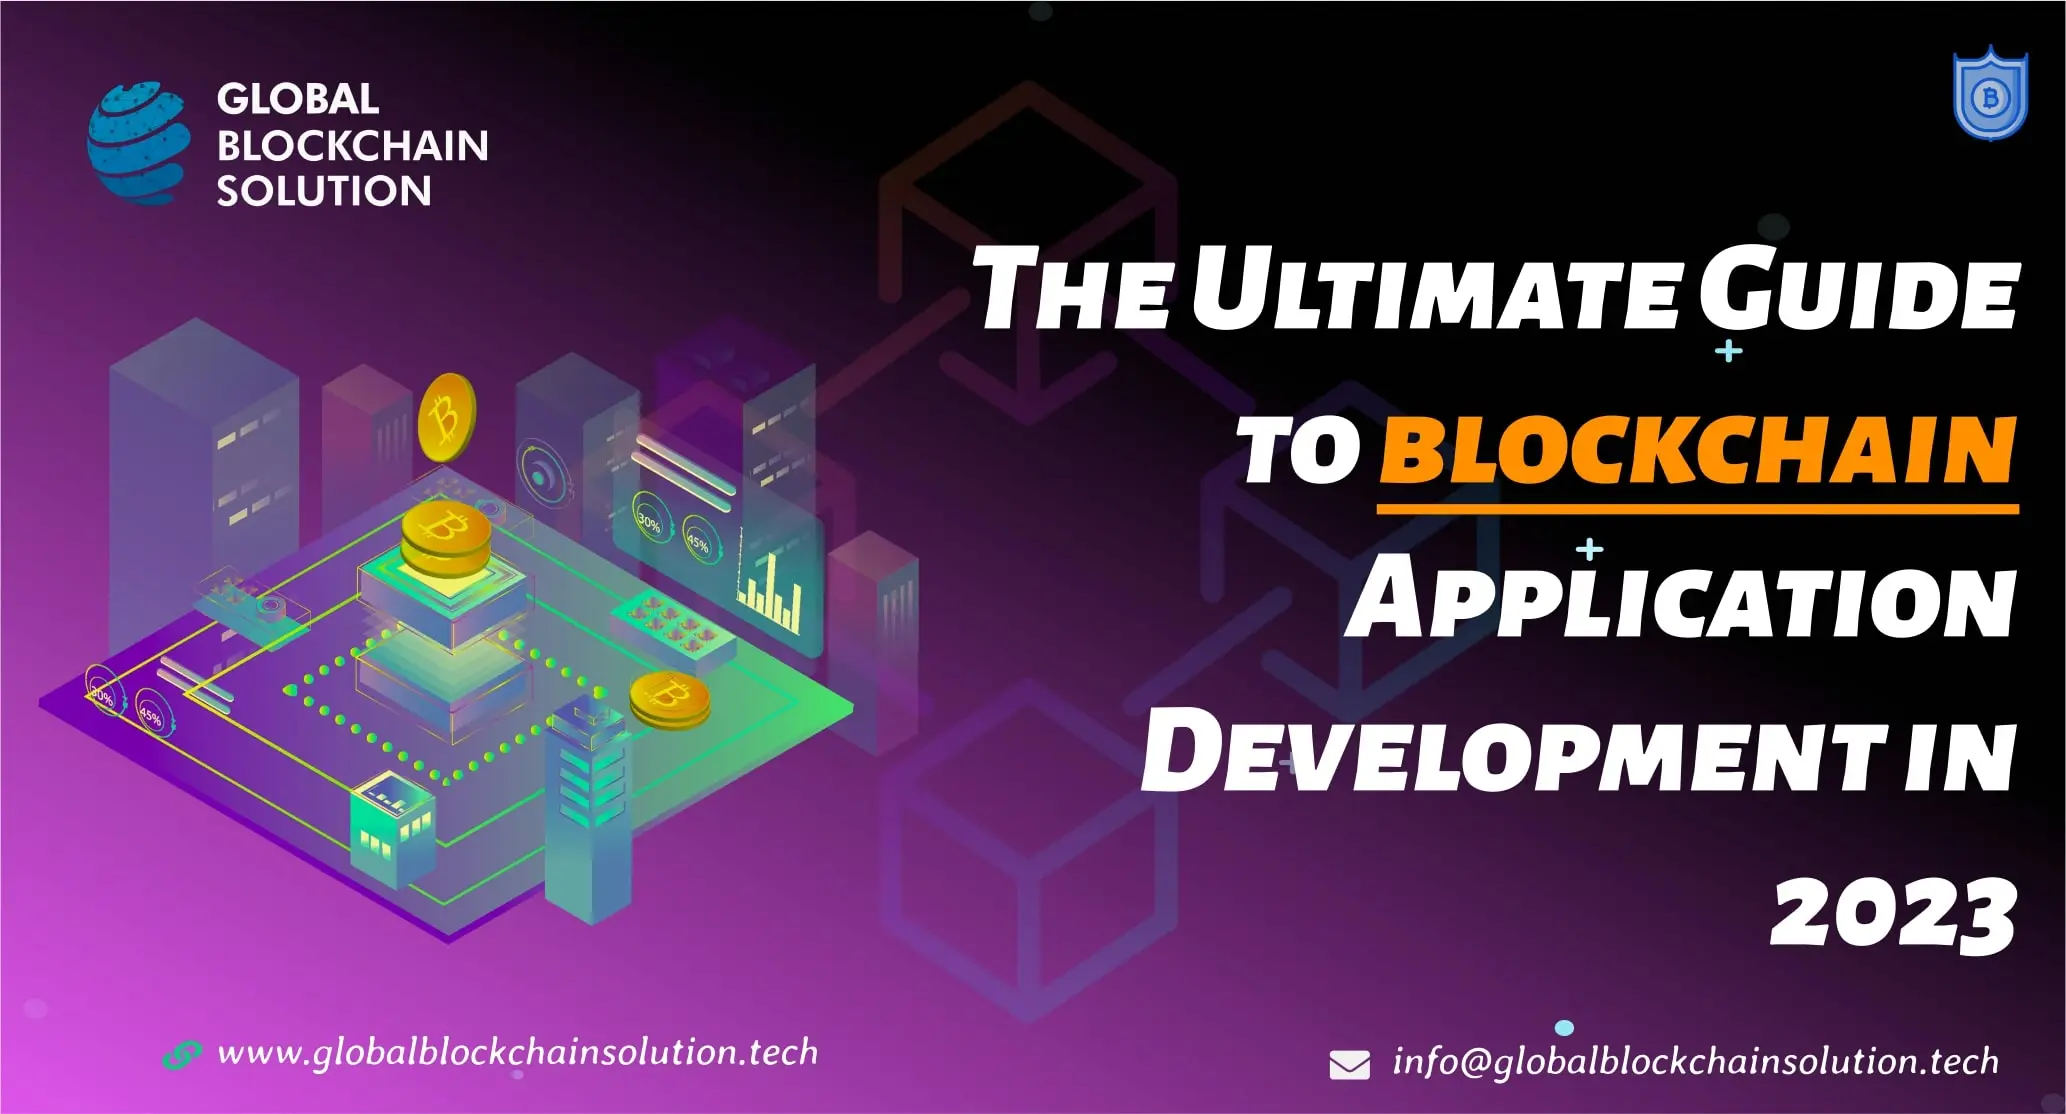 The Ultimate Guide to Blockchain Application Development in 2023